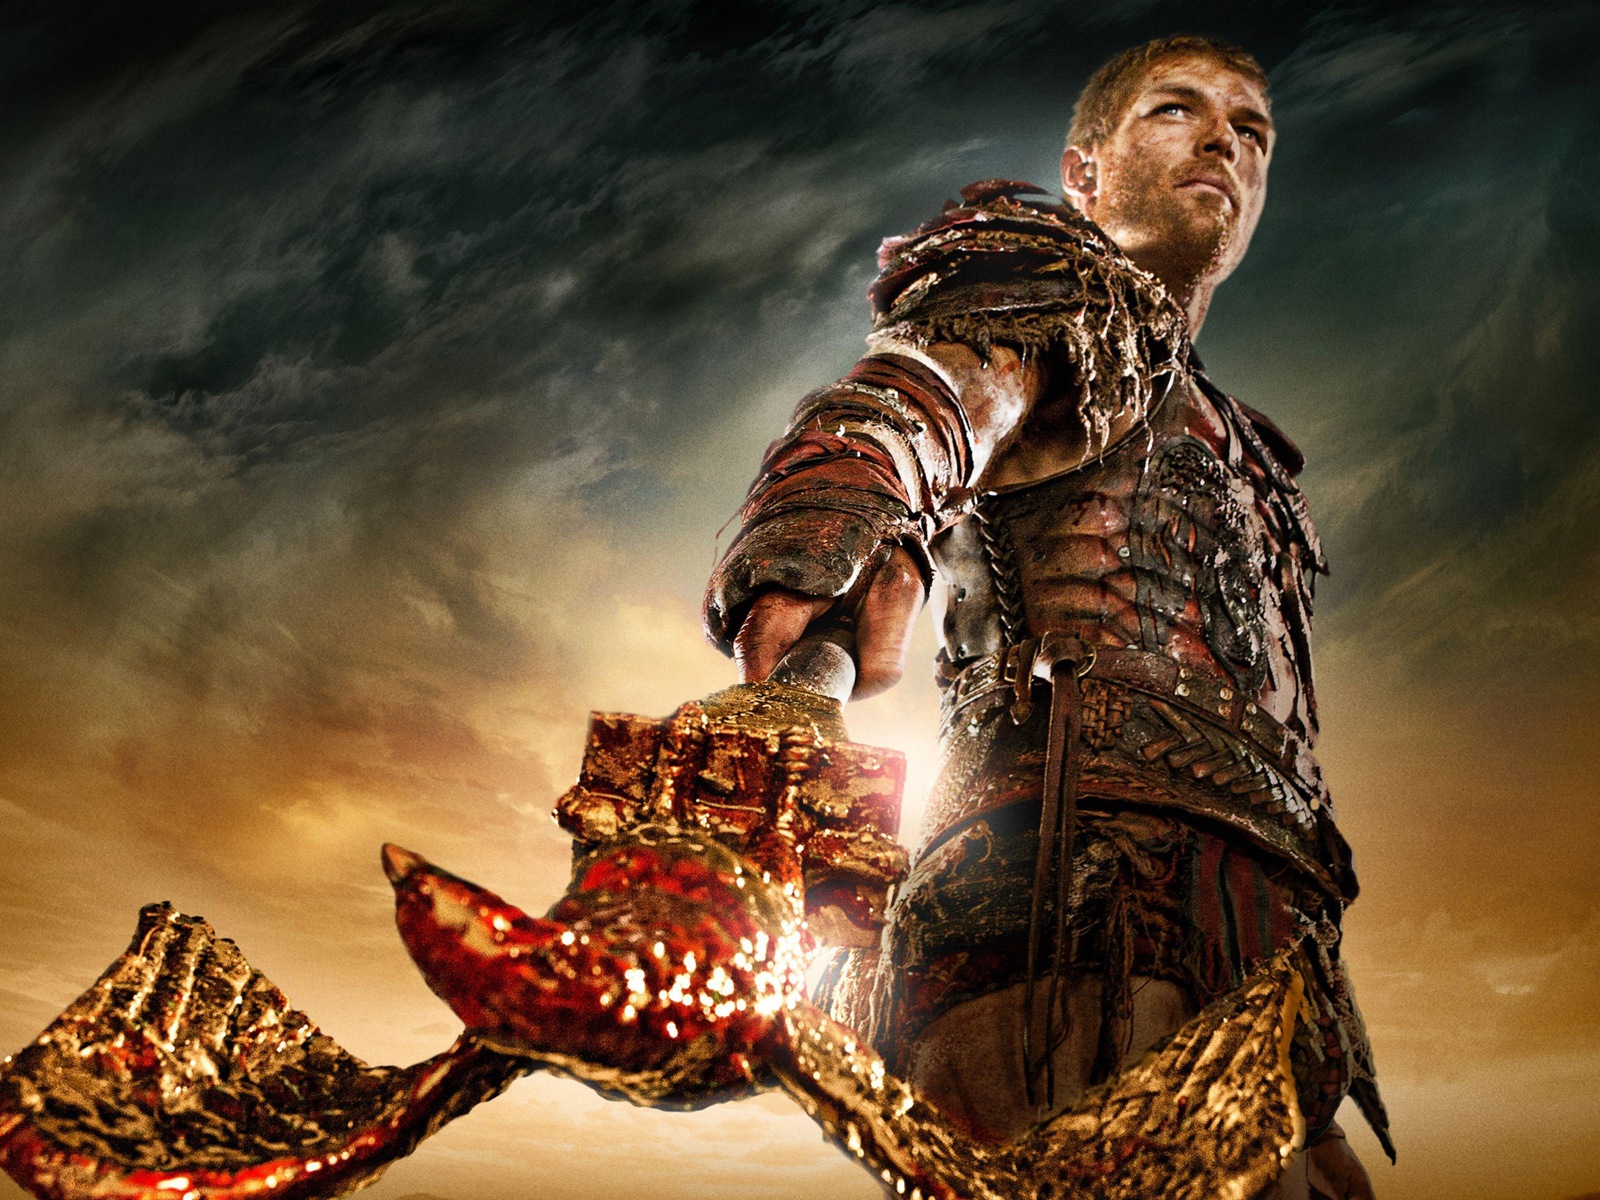 Spartacus: War of the Damned HD wallpapers #19 - 1600x1200